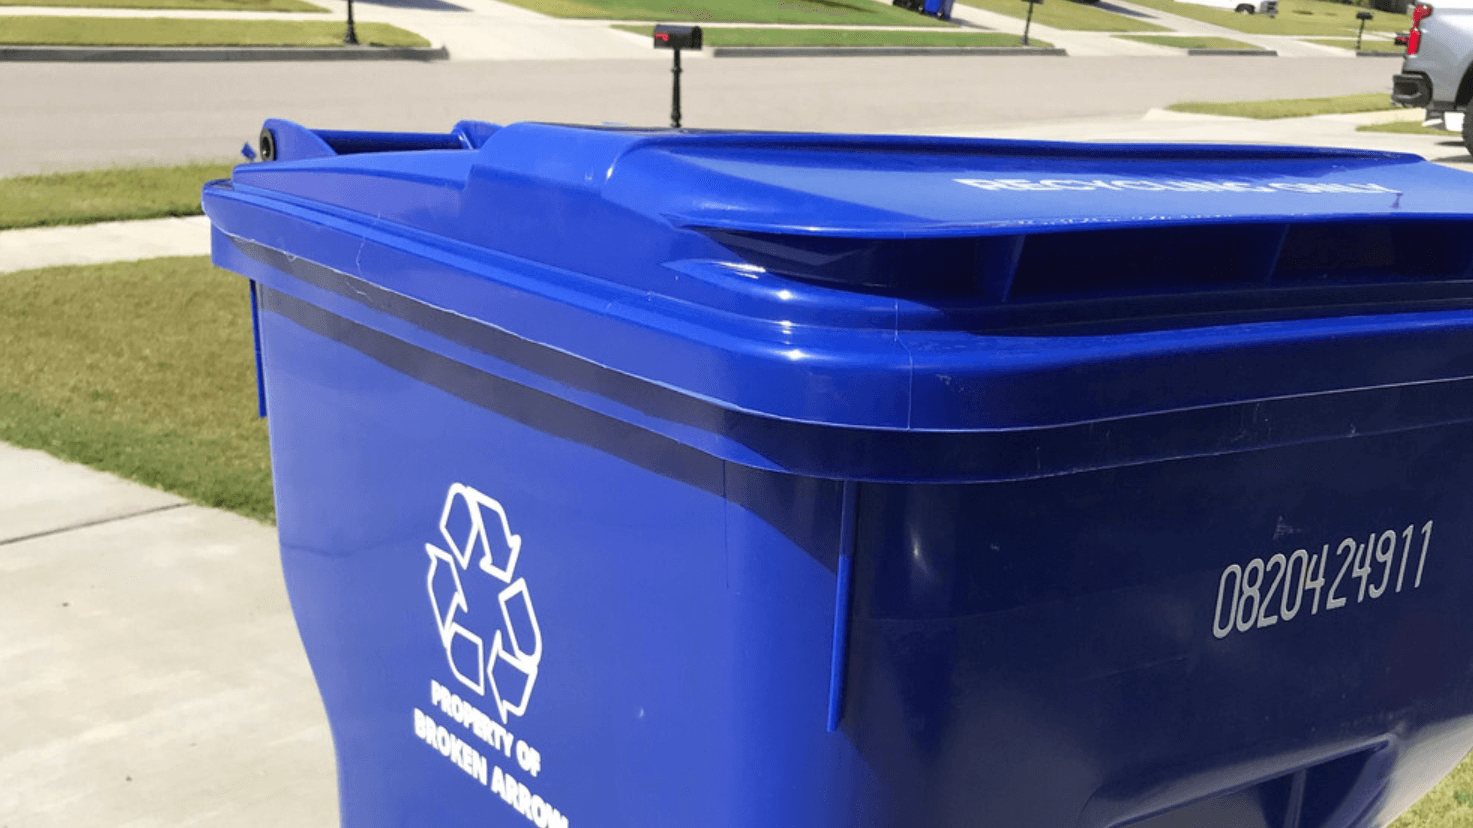 Broken Arrow Trash Service Path to Sustainable Waste Management